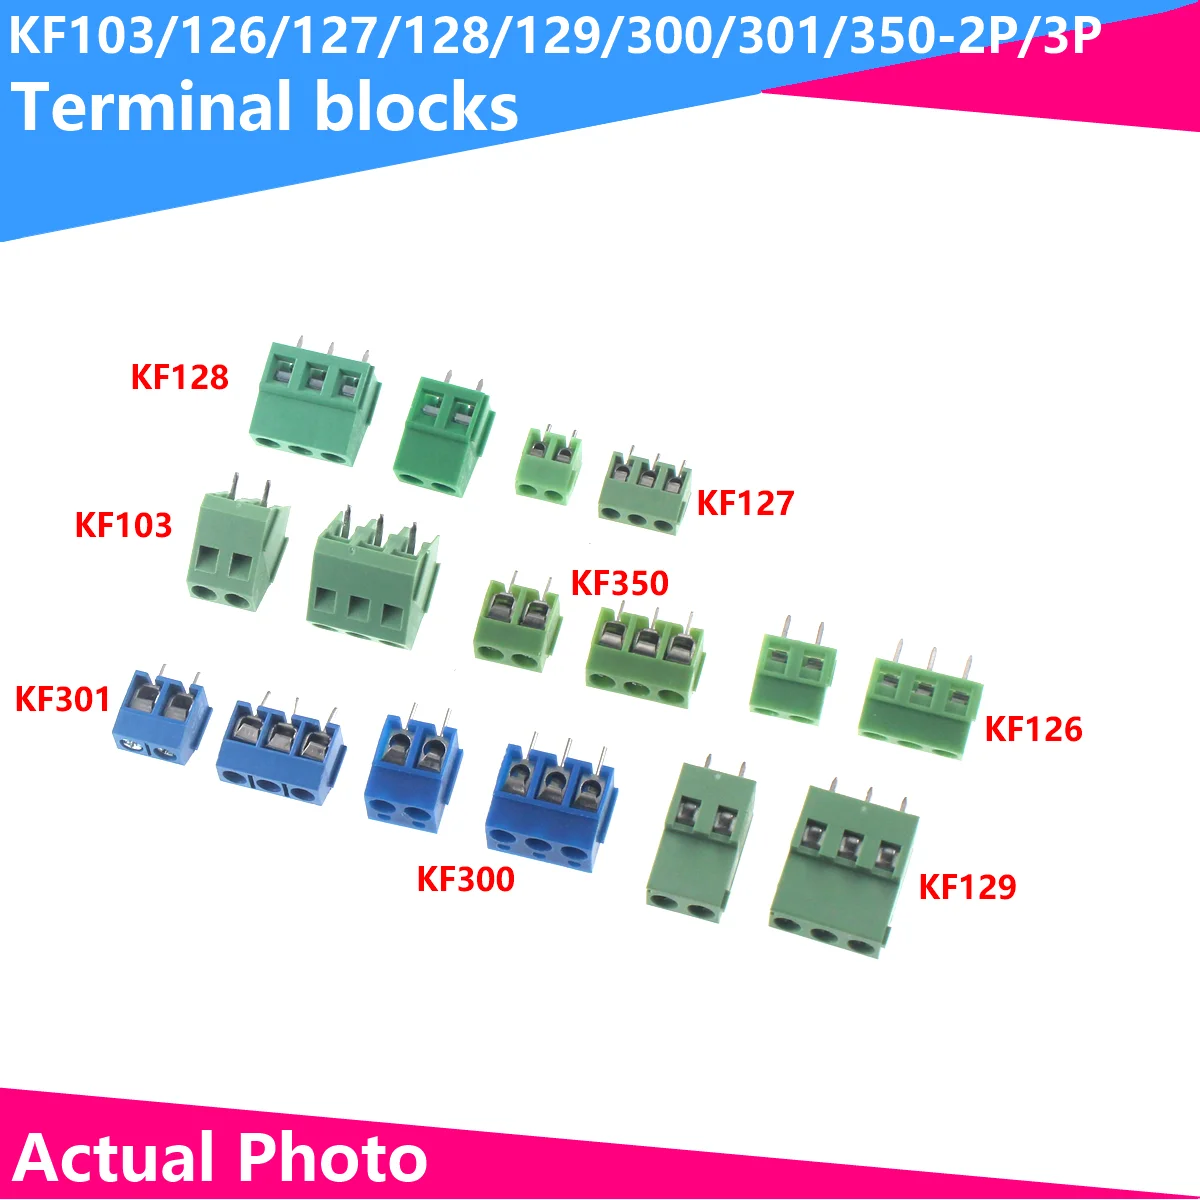 

10PCS KF103/126/127/128/129/300/301/350-2P/3P PCB Screw Terminal Block 2 Pin 3 Pin Wire Connector Straight Needle Blue